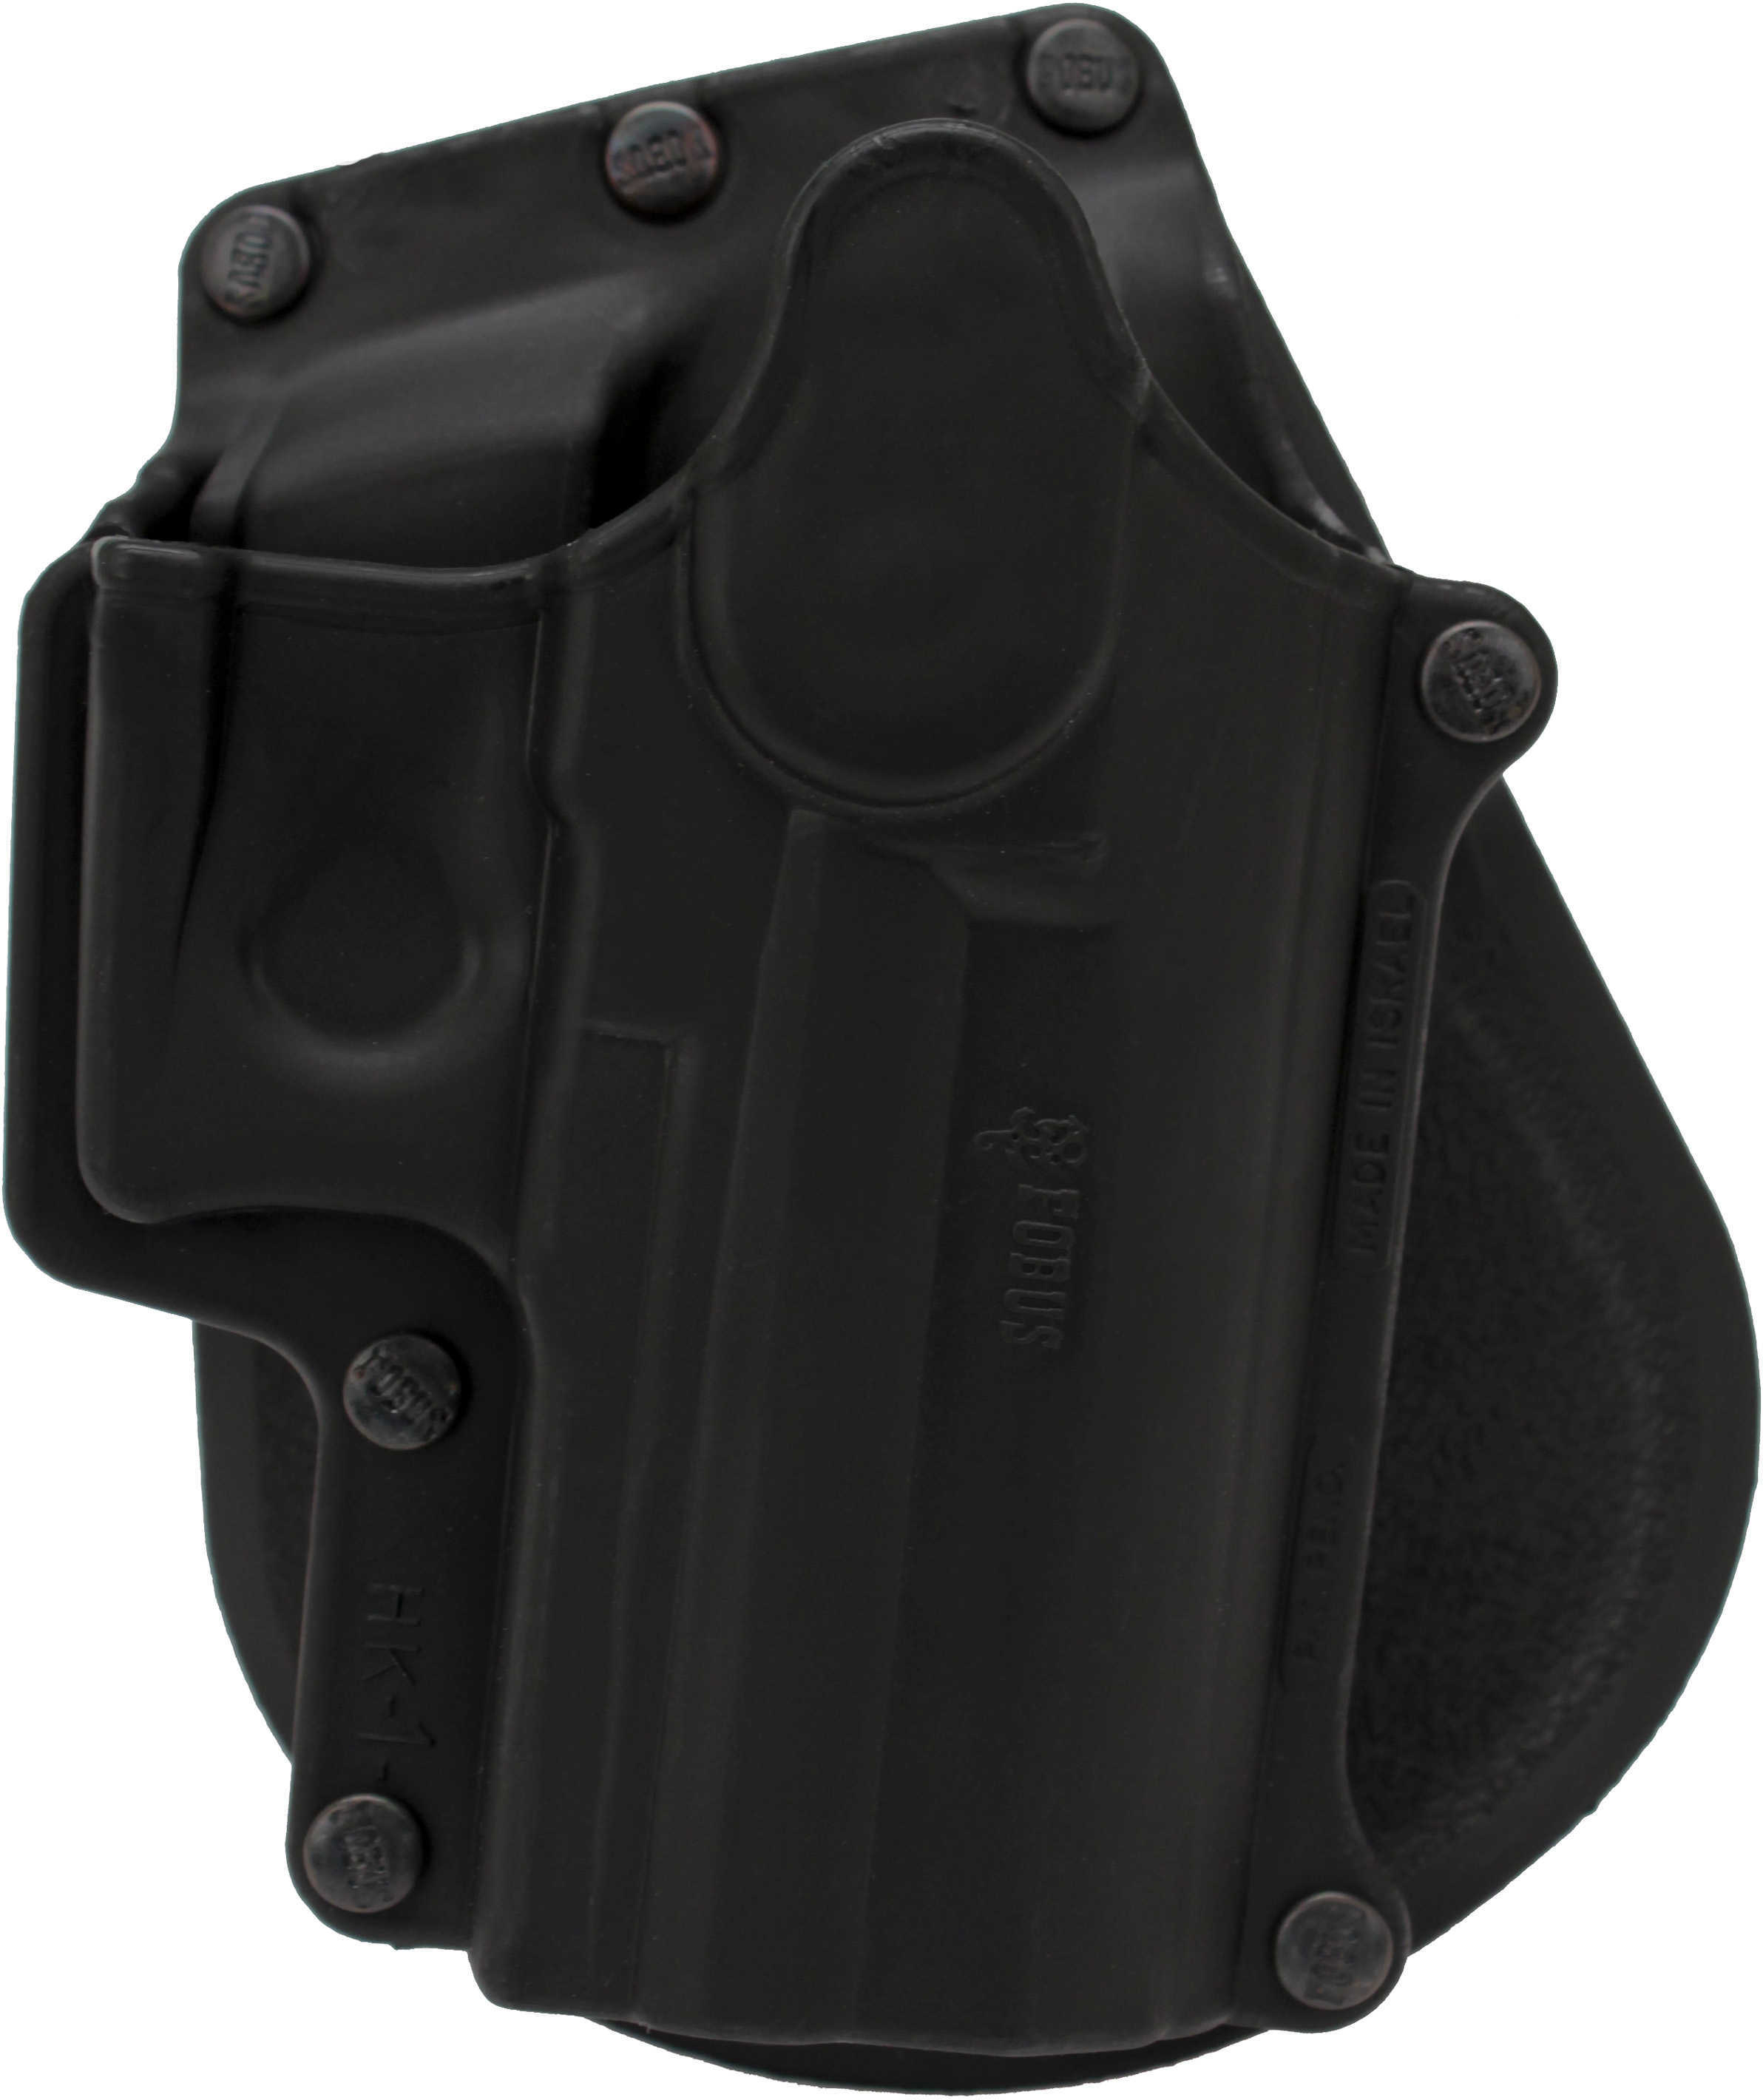 Fobus Standard High Ride Holster With Paddle Attachment Md: HK1